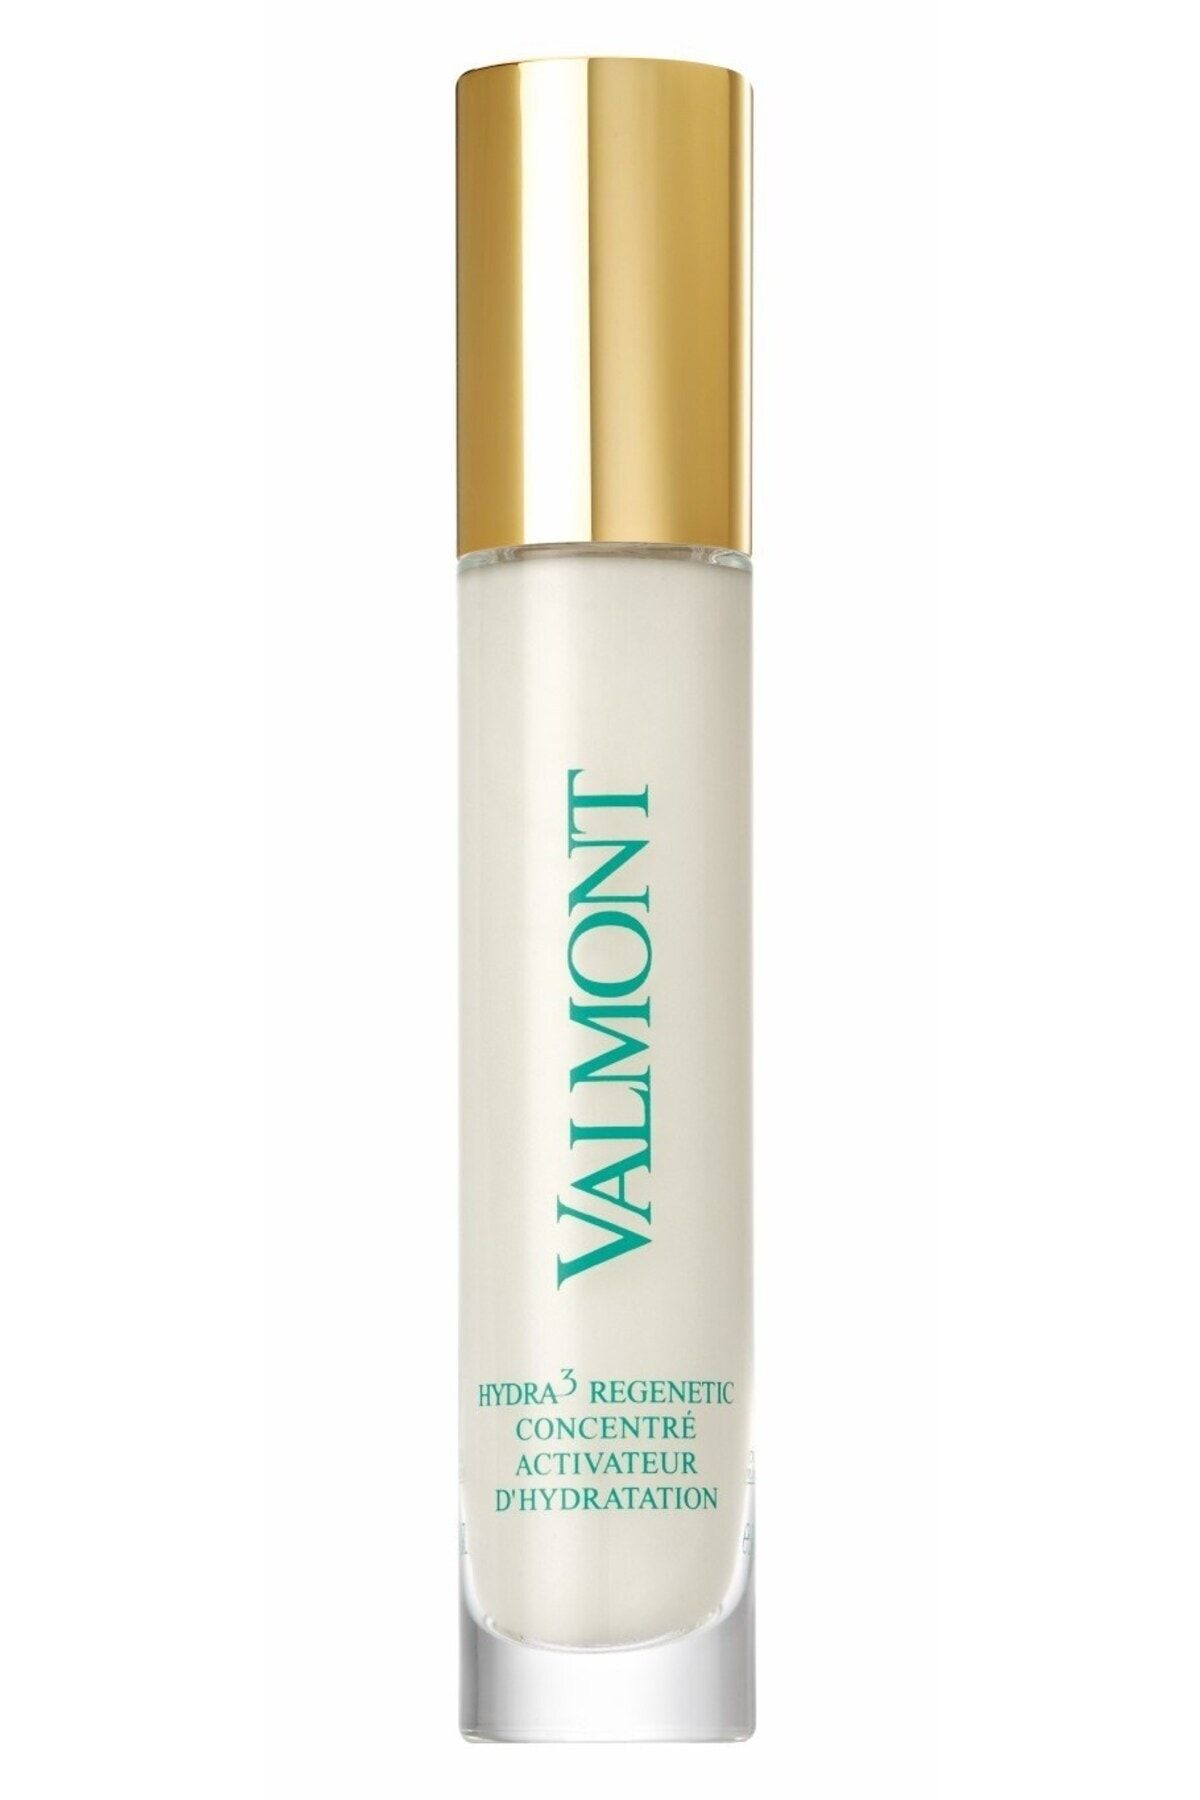 Valmont Hydra3Regenetic Concentrate Serum